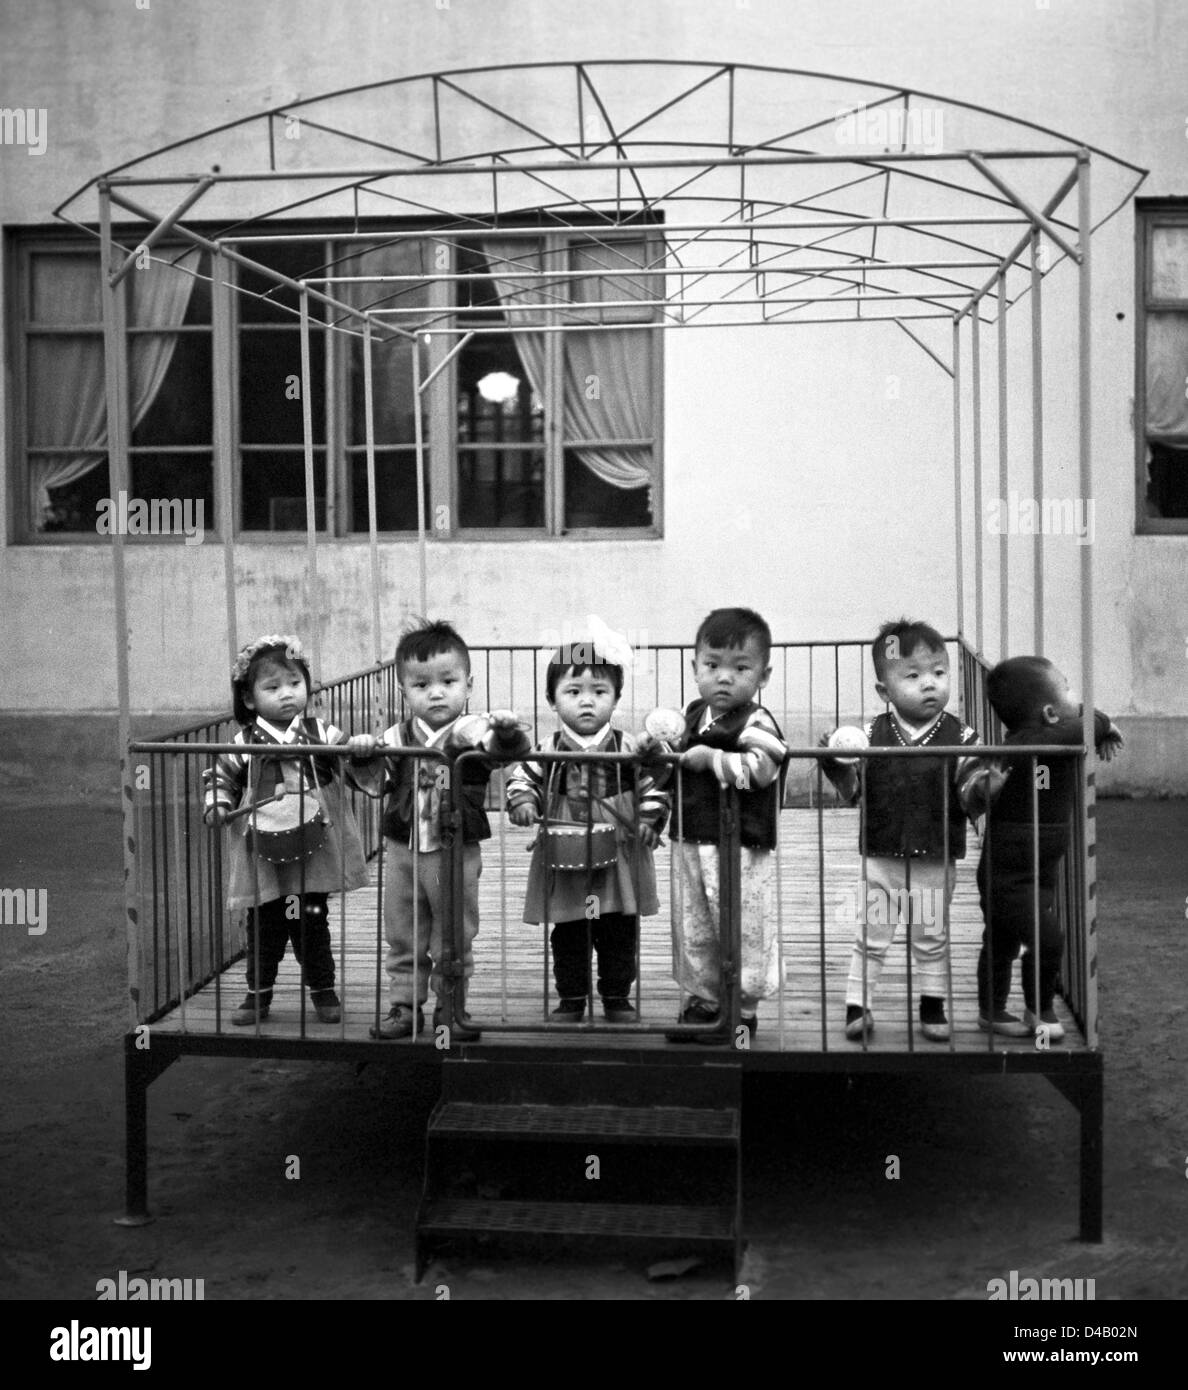 Children stand in a playpen on a playground in a kindergarten in Pyongyang, the capital of the Korean Democratic People's Republic, photographed on the 1st of November in 1971.     Photo: ddrbildarchiv.de / Klaus Morgenstern - GESPERRT FÜR BILDFUNK Stock Photo